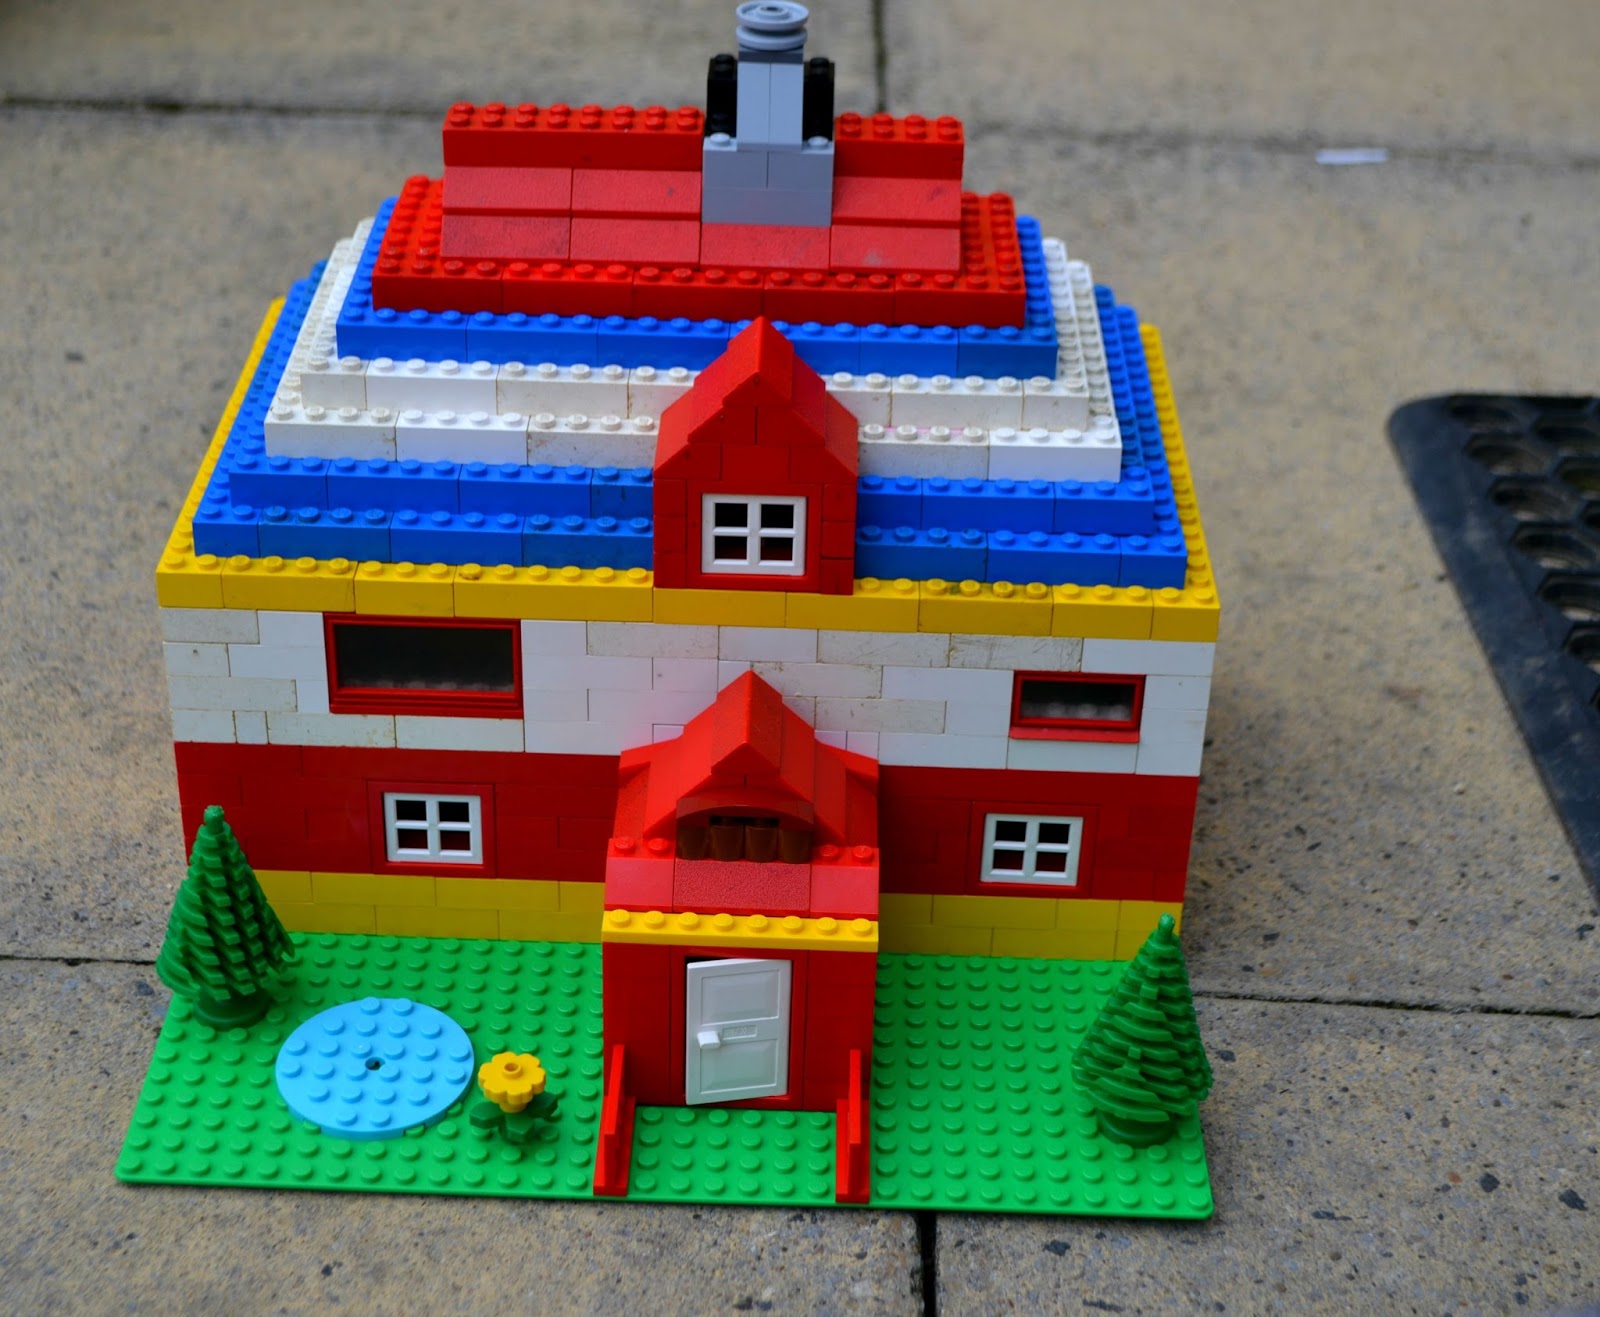 Lego dream house competition with Ocean Finance - Rock and Roll Pussycat